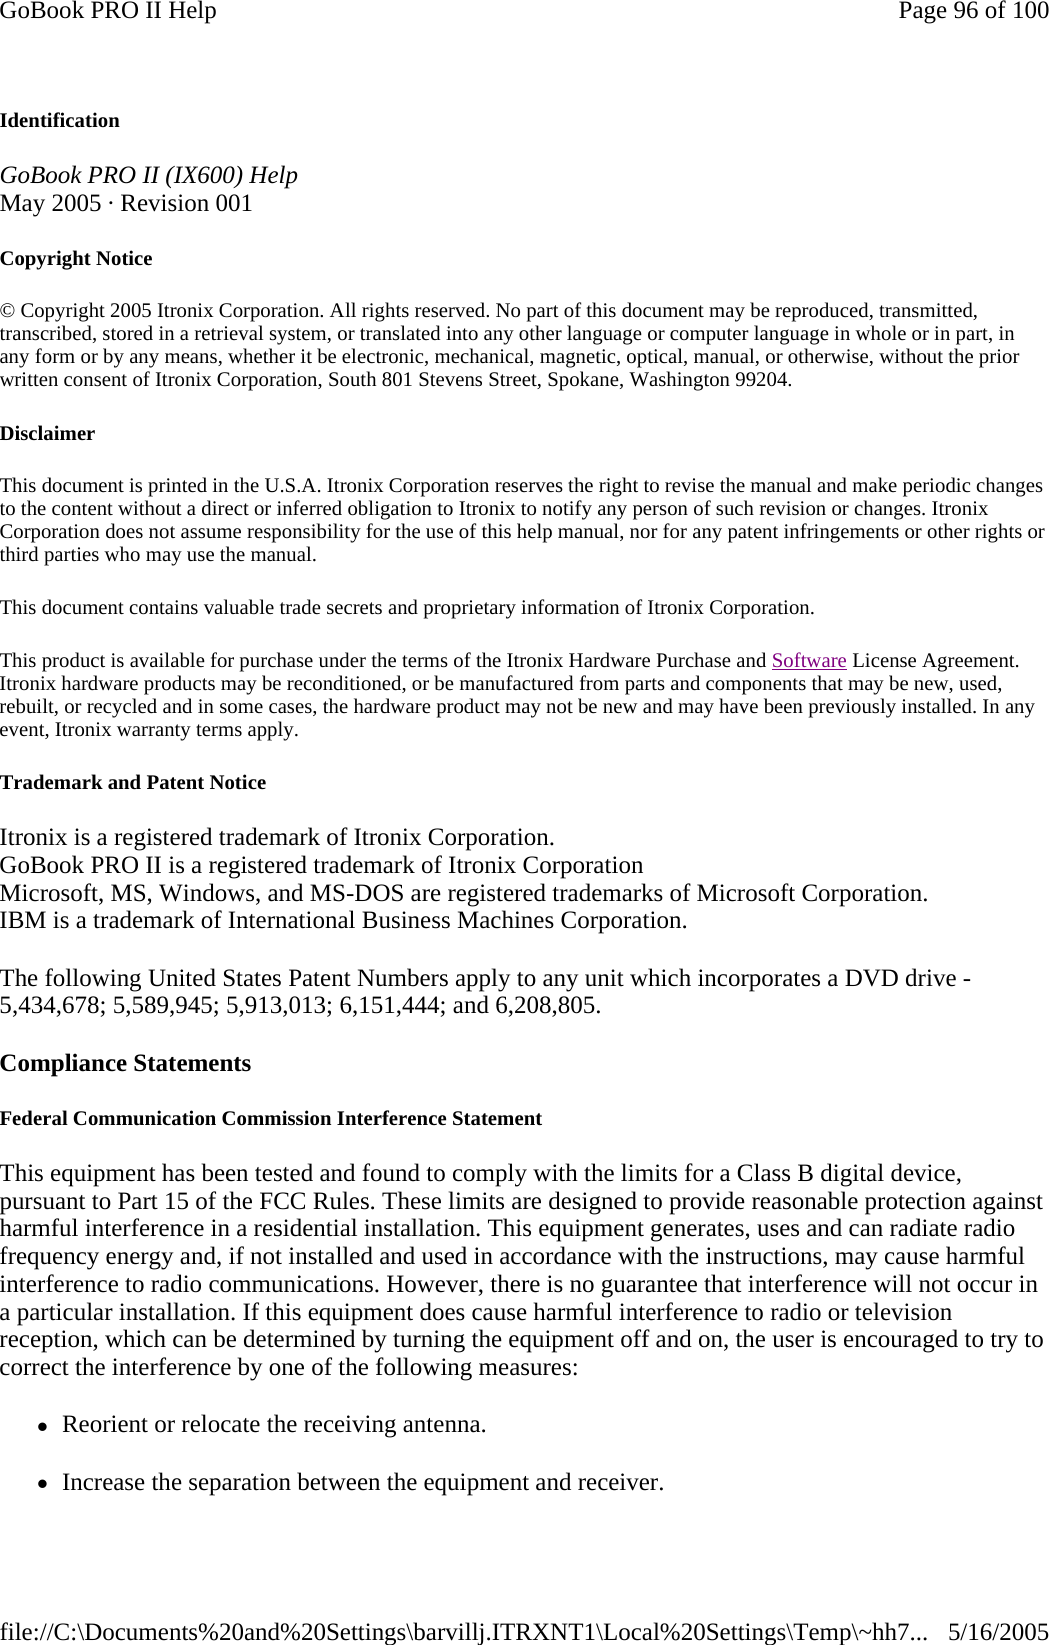 Identification GoBook PRO II (IX600) Help May 2005 · Revision 001 Copyright Notice © Copyright 2005 Itronix Corporation. All rights reserved. No part of this document may be reproduced, transmitted, transcribed, stored in a retrieval system, or translated into any other language or computer language in whole or in part, in any form or by any means, whether it be electronic, mechanical, magnetic, optical, manual, or otherwise, without the prior written consent of Itronix Corporation, South 801 Stevens Street, Spokane, Washington 99204. Disclaimer This document is printed in the U.S.A. Itronix Corporation reserves the right to revise the manual and make periodic changes to the content without a direct or inferred obligation to Itronix to notify any person of such revision or changes. Itronix Corporation does not assume responsibility for the use of this help manual, nor for any patent infringements or other rights or third parties who may use the manual. This document contains valuable trade secrets and proprietary information of Itronix Corporation. This product is available for purchase under the terms of the Itronix Hardware Purchase and Software License Agreement. Itronix hardware products may be reconditioned, or be manufactured from parts and components that may be new, used, rebuilt, or recycled and in some cases, the hardware product may not be new and may have been previously installed. In any event, Itronix warranty terms apply. Trademark and Patent Notice Itronix is a registered trademark of Itronix Corporation. GoBook PRO II is a registered trademark of Itronix Corporation Microsoft, MS, Windows, and MS-DOS are registered trademarks of Microsoft Corporation. IBM is a trademark of International Business Machines Corporation. The following United States Patent Numbers apply to any unit which incorporates a DVD drive - 5,434,678; 5,589,945; 5,913,013; 6,151,444; and 6,208,805. Compliance Statements Federal Communication Commission Interference Statement This equipment has been tested and found to comply with the limits for a Class B digital device, pursuant to Part 15 of the FCC Rules. These limits are designed to provide reasonable protection against harmful interference in a residential installation. This equipment generates, uses and can radiate radio frequency energy and, if not installed and used in accordance with the instructions, may cause harmful interference to radio communications. However, there is no guarantee that interference will not occur in a particular installation. If this equipment does cause harmful interference to radio or television reception, which can be determined by turning the equipment off and on, the user is encouraged to try to correct the interference by one of the following measures: zReorient or relocate the receiving antenna. zIncrease the separation between the equipment and receiver.Page 96 of 100GoBook PRO II Help5/16/2005file://C:\Documents%20and%20Settings\barvillj.ITRXNT1\Local%20Settings\Temp\~hh7...